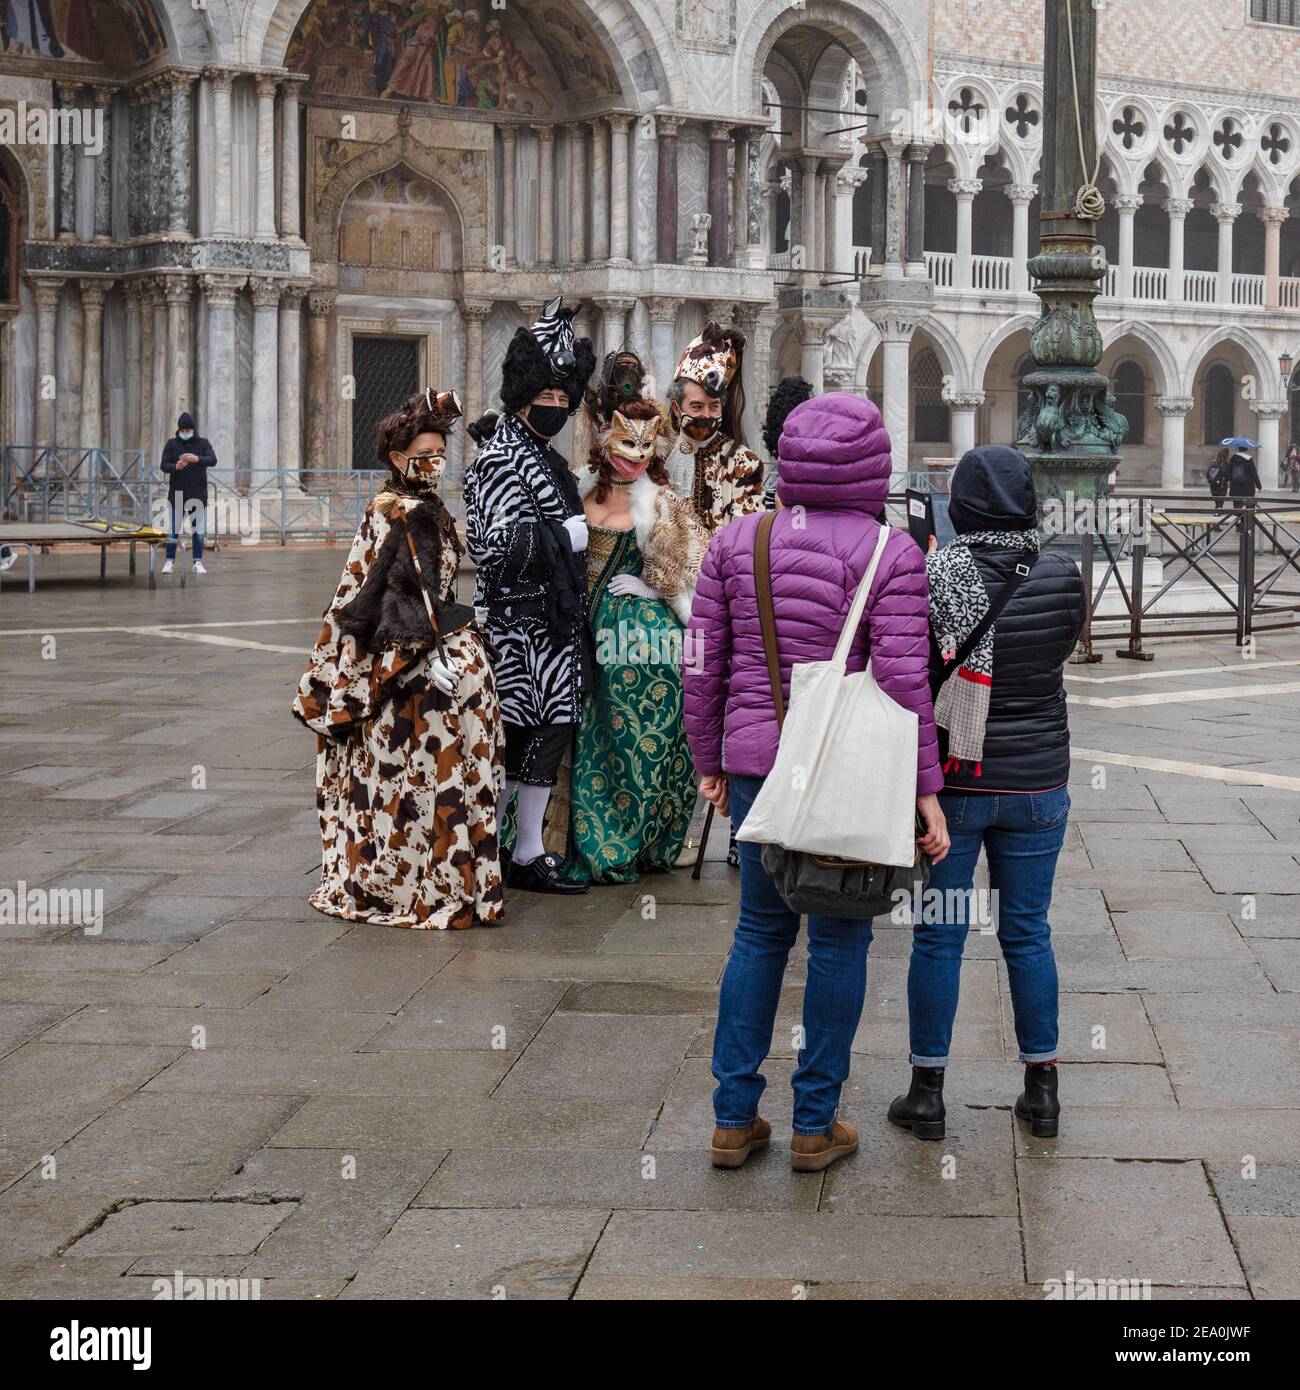 Photographing a carnival gathering during covid 19 restrictions in Venice February 2021 Stock Photo